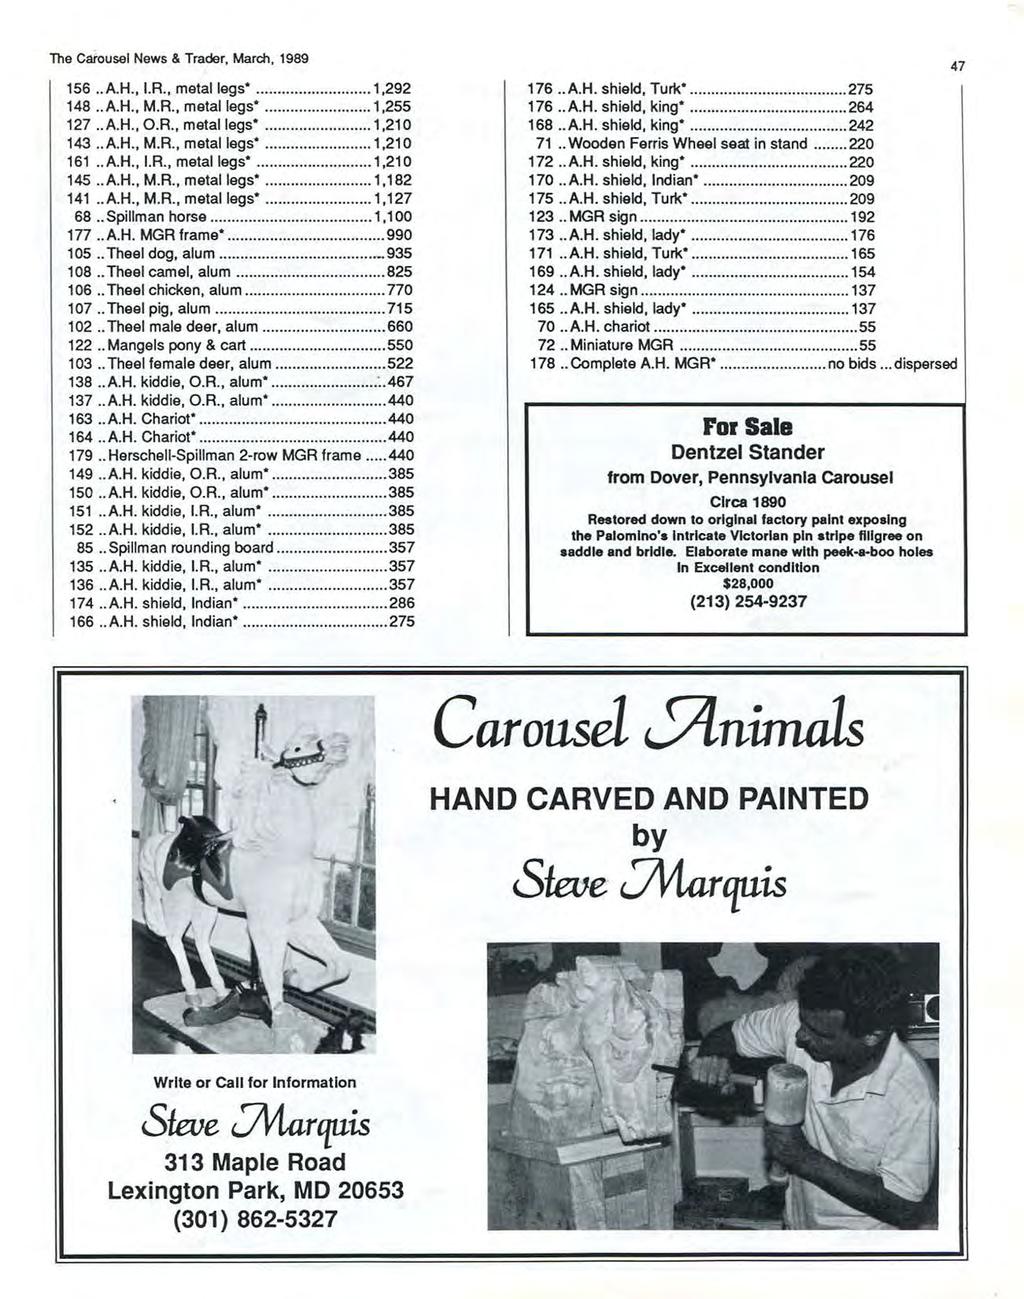 The Carousel News & Trader, March, 1989 156.. A. H., I.R., metal legs... 1,292 148.. A. H., M.R., metal legs... 1,255 127.. A. H., O.R., metal legs... 1,210 143.. A.H., M.R., metal legs... 1,210 161.